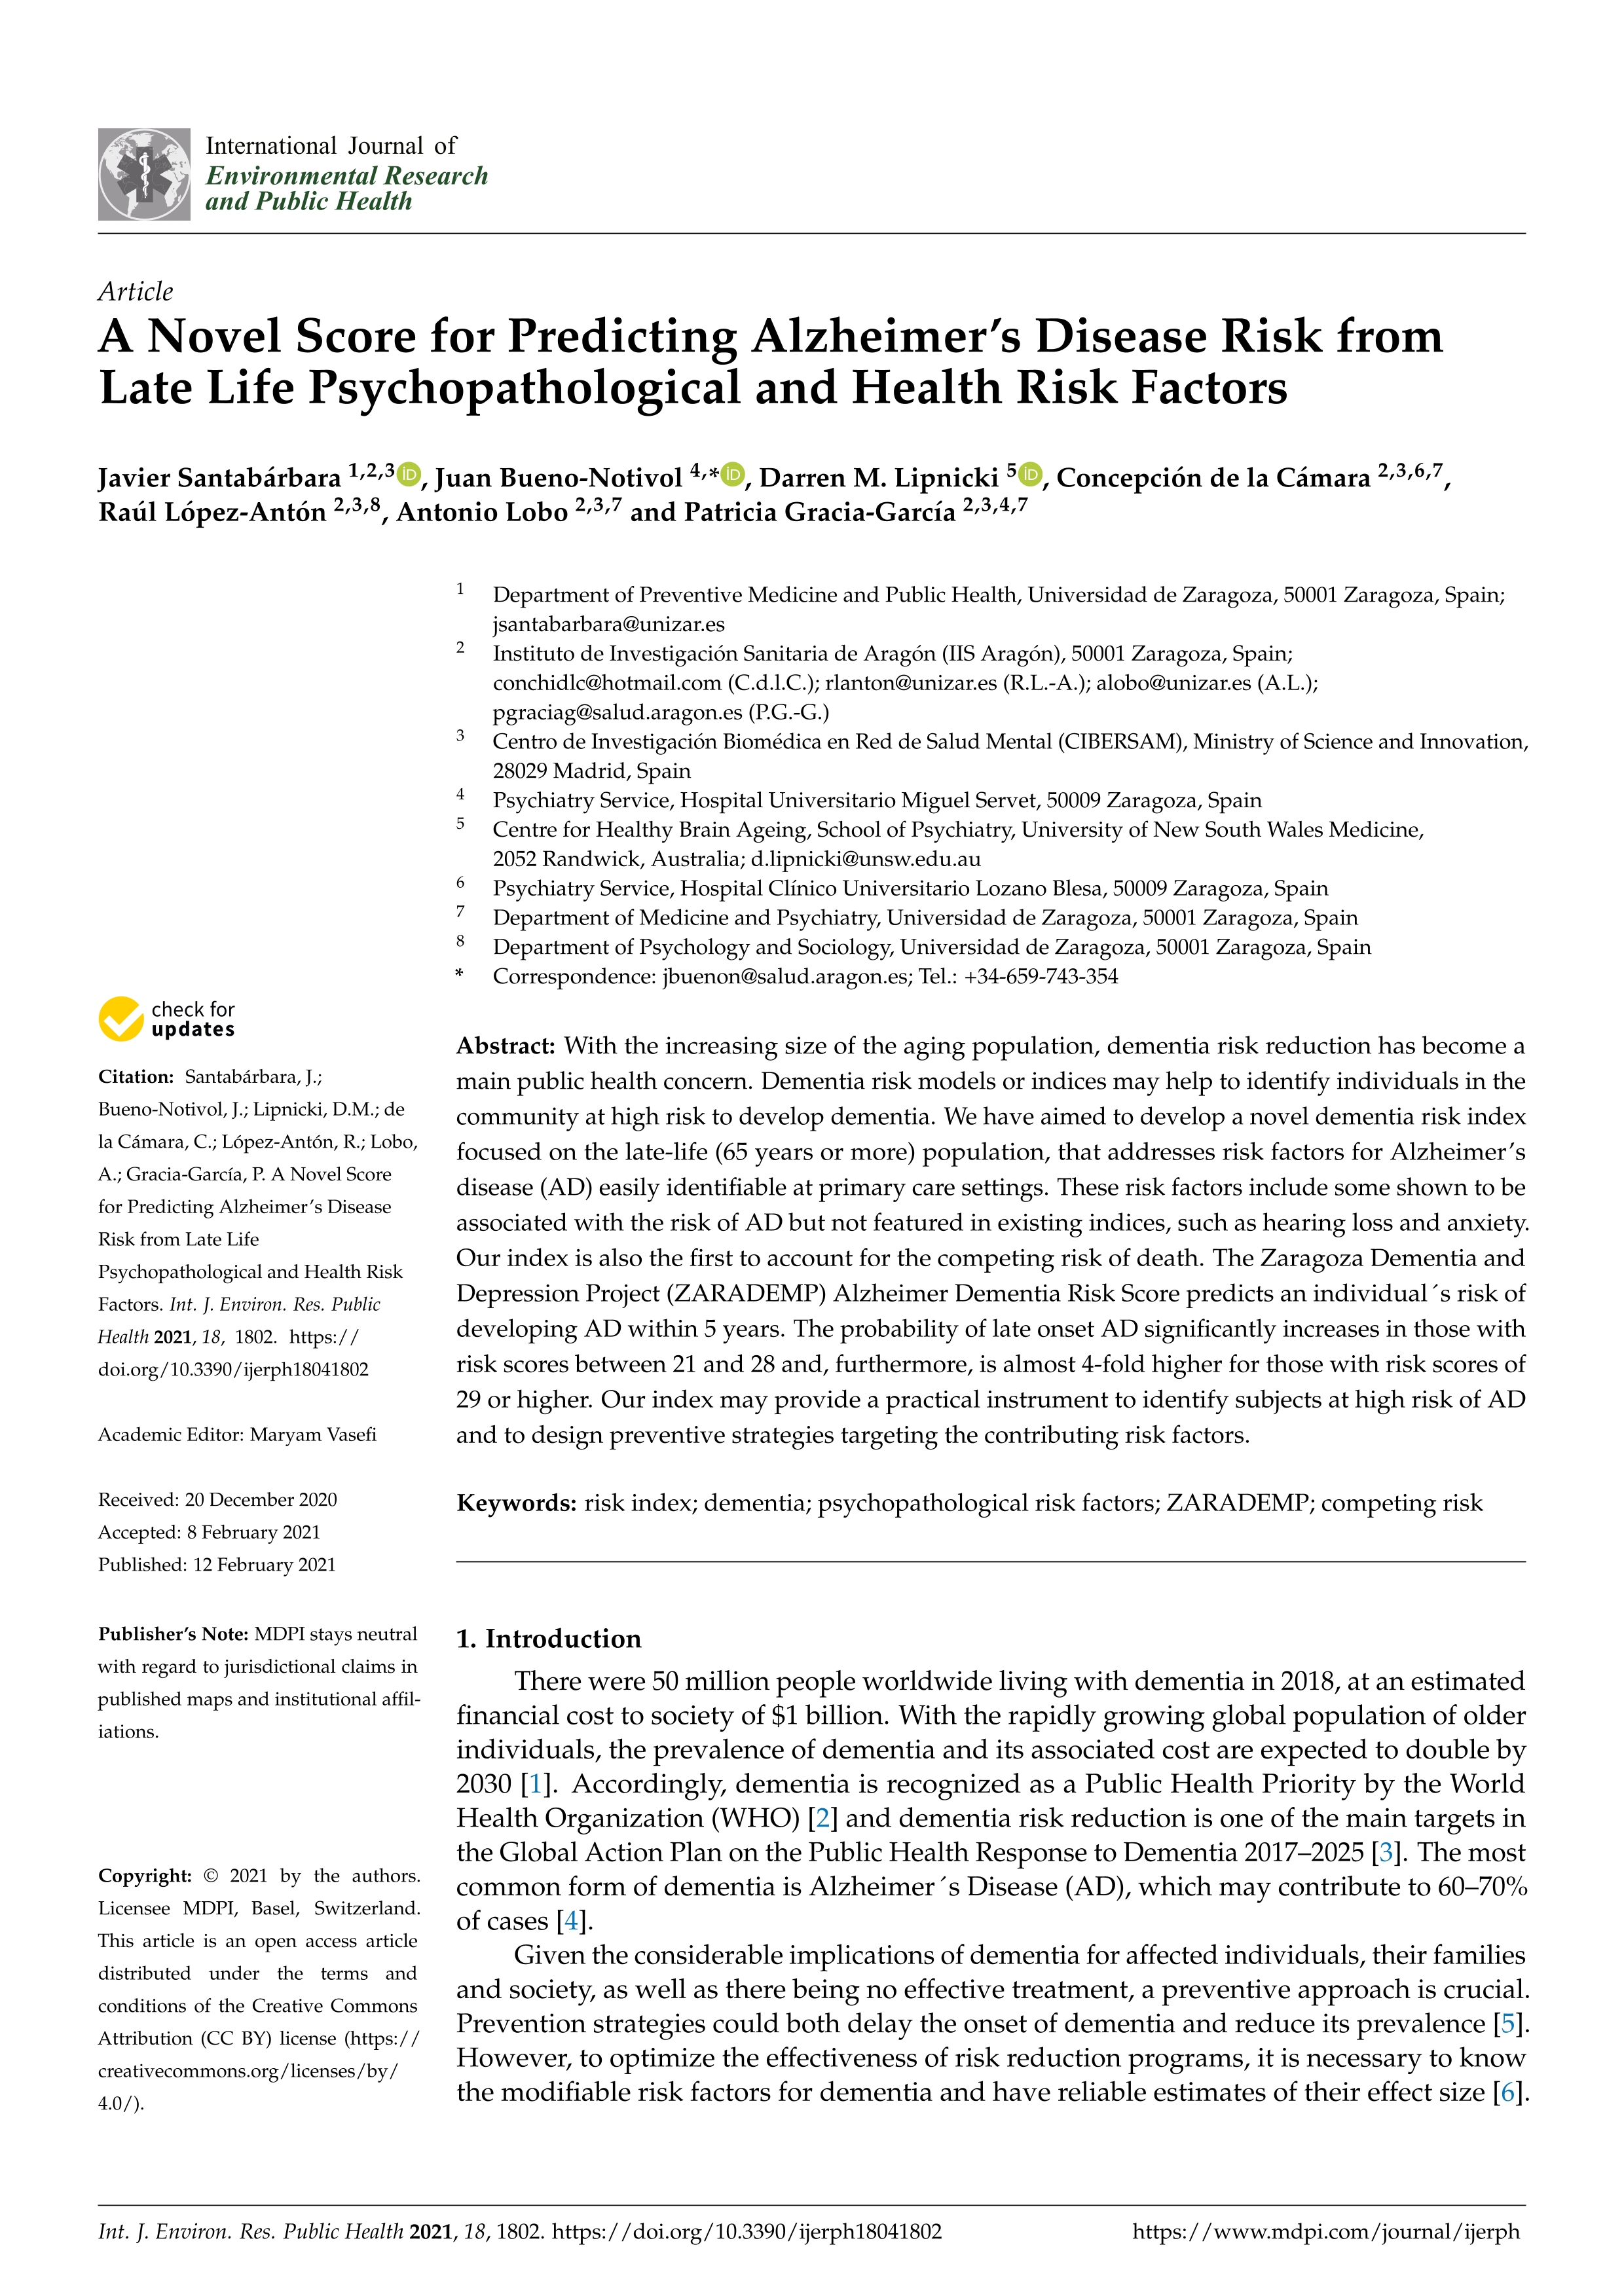 A novel score for predicting alzheimer’s disease risk from late life psychopathological and health risk factors